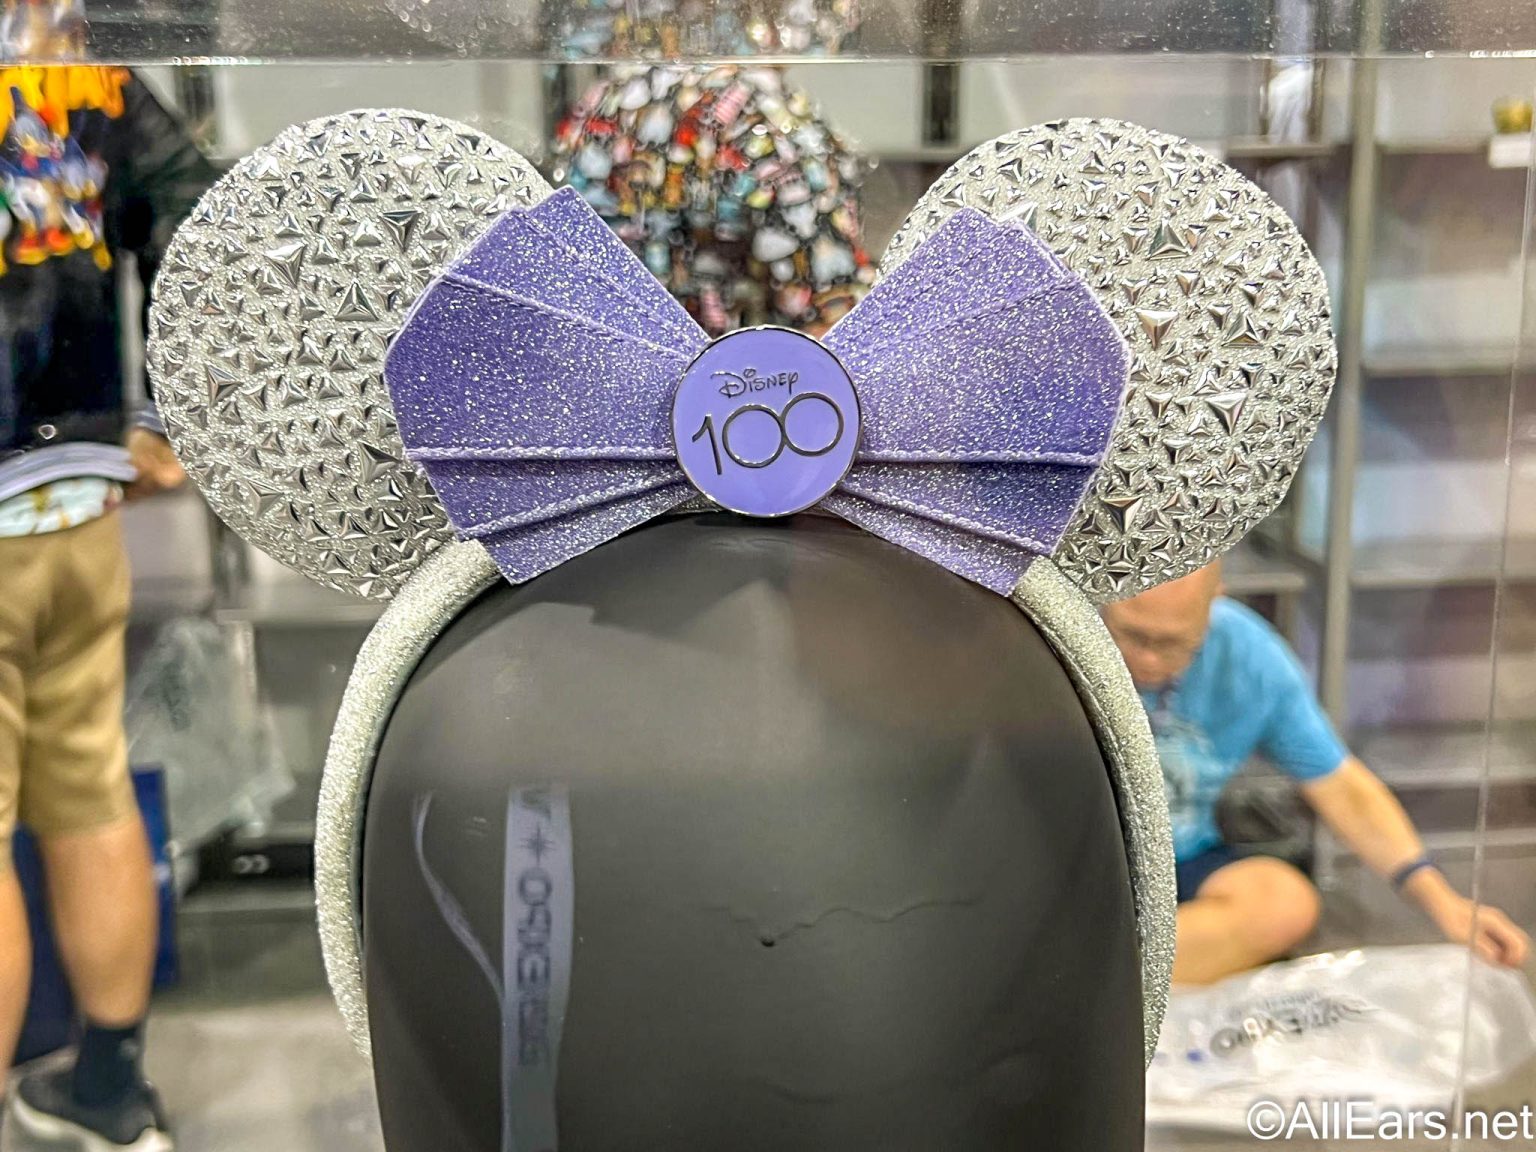 Disney 100th Anniversary Merchandise Will Be Released Online SOON